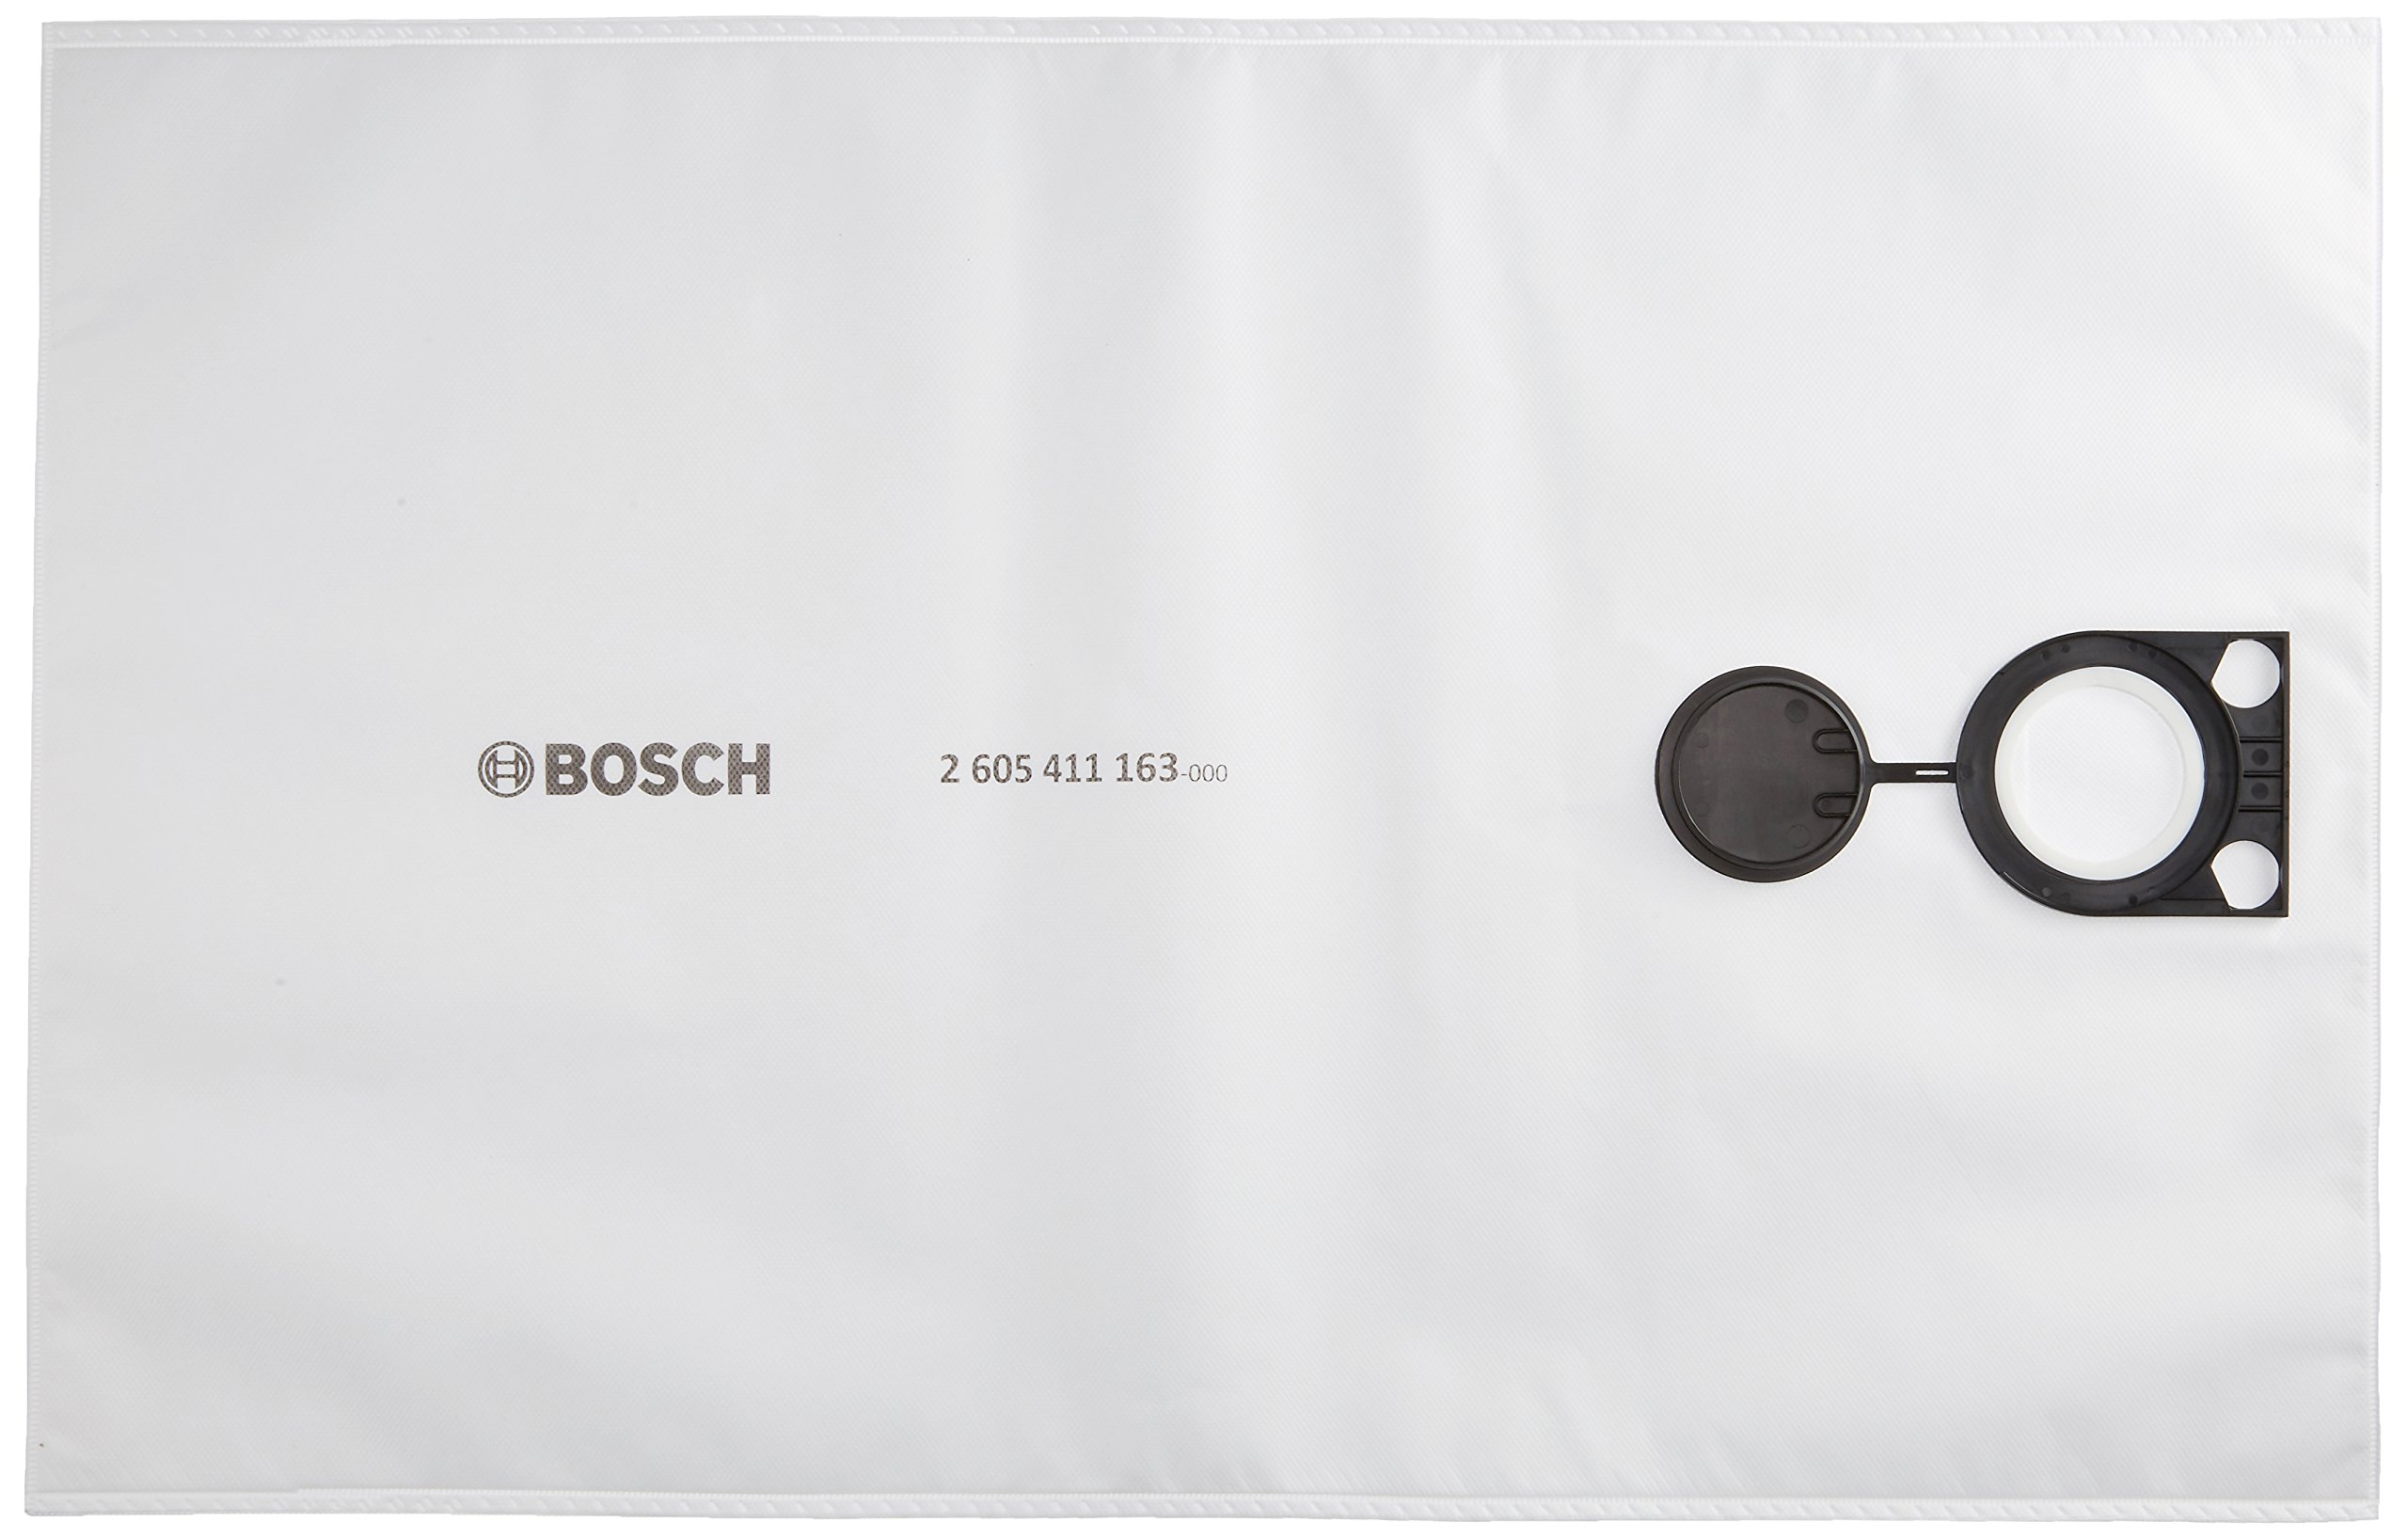 BOSCH({bV) DUST BAGS 5PK GAS50 WOOD ONLY